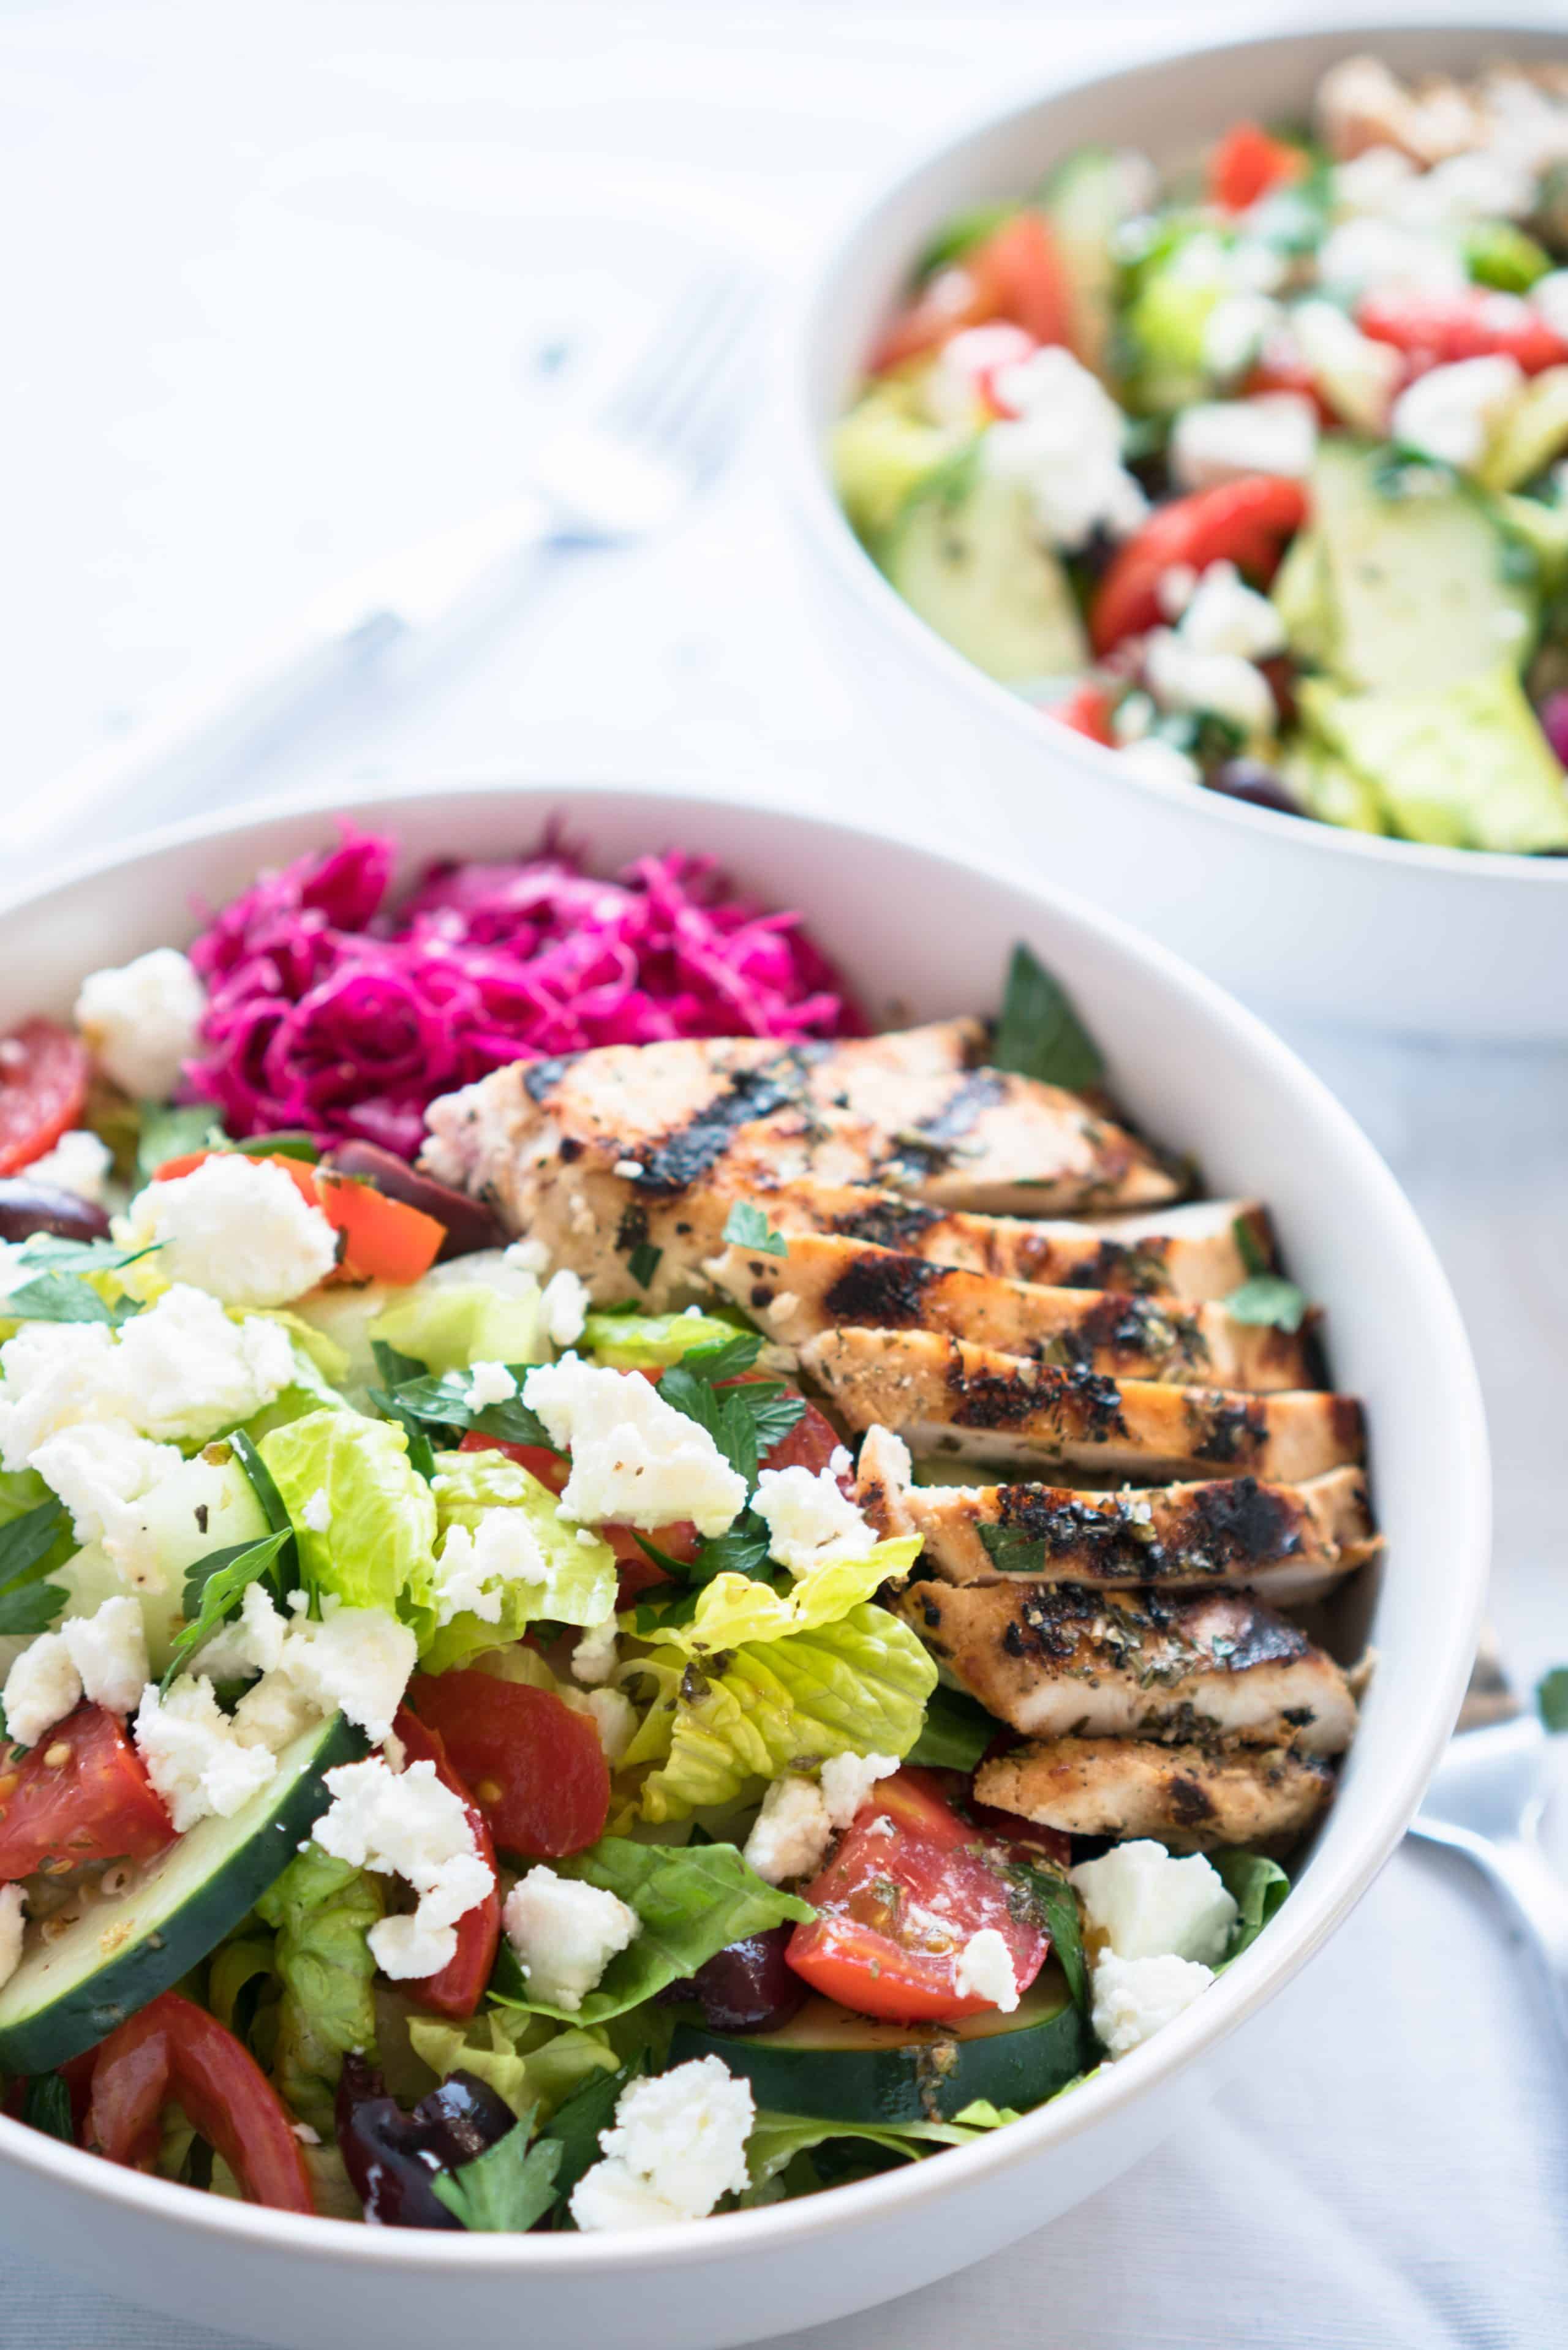 Mediterranean Salad Bowls – Simple, healthy recipe for Mediterranean Salad Bowls! Crisp romaine topped with cucumber, tomatoes, Kalamata olives, feta cheese, and homemade pickled red cabbage with a lemony Greek Dressing. Gluten-free & low carb! ♥ | freeyourfork.com